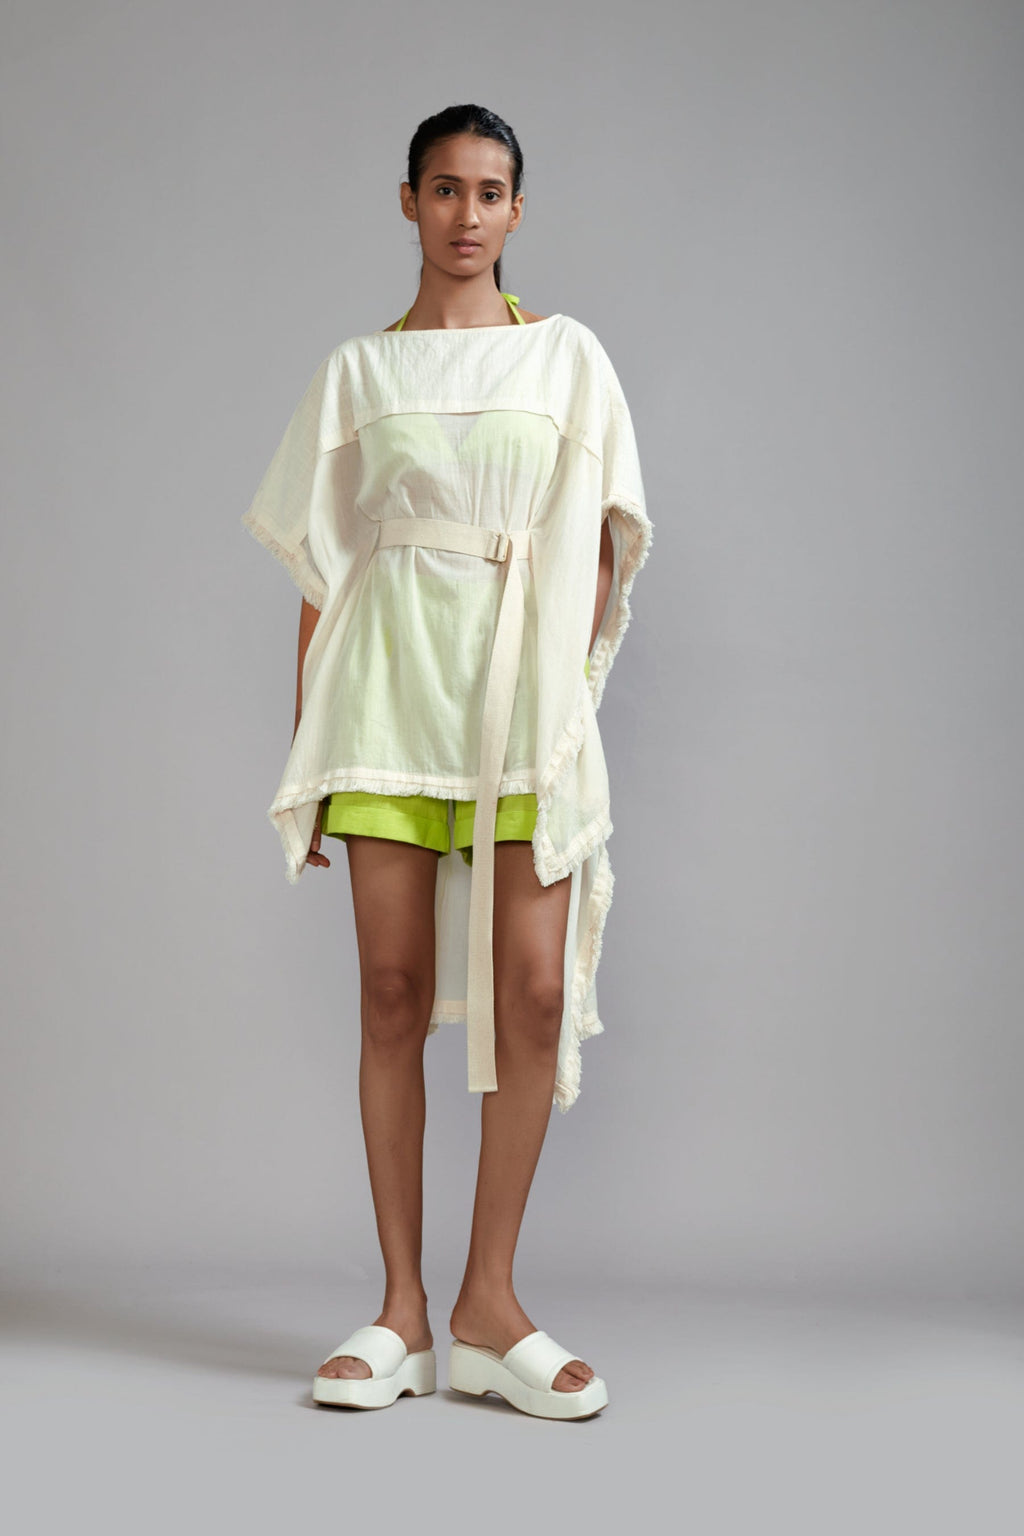 Mati SET XS Off-White wIth Neon Green Fringed Kaftan Co-Ords (3 PCS)